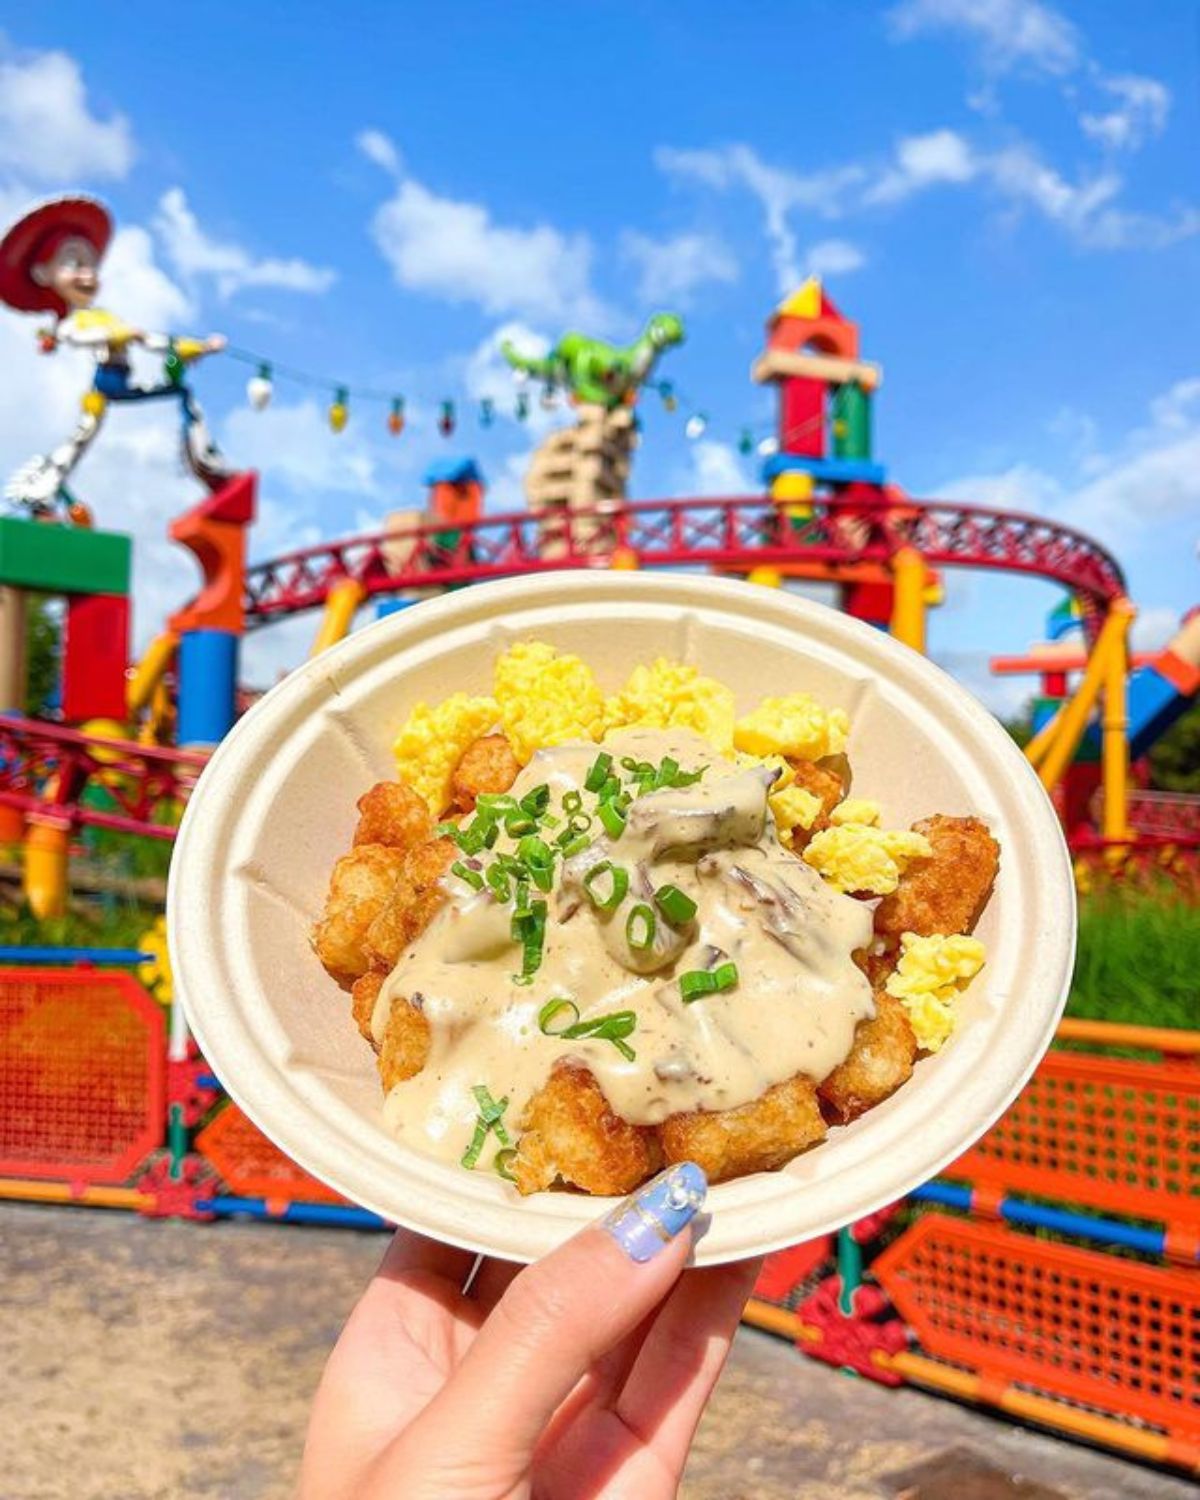 tots, scrambled eggs, and gravy breakfast at Woody's Lunch Box